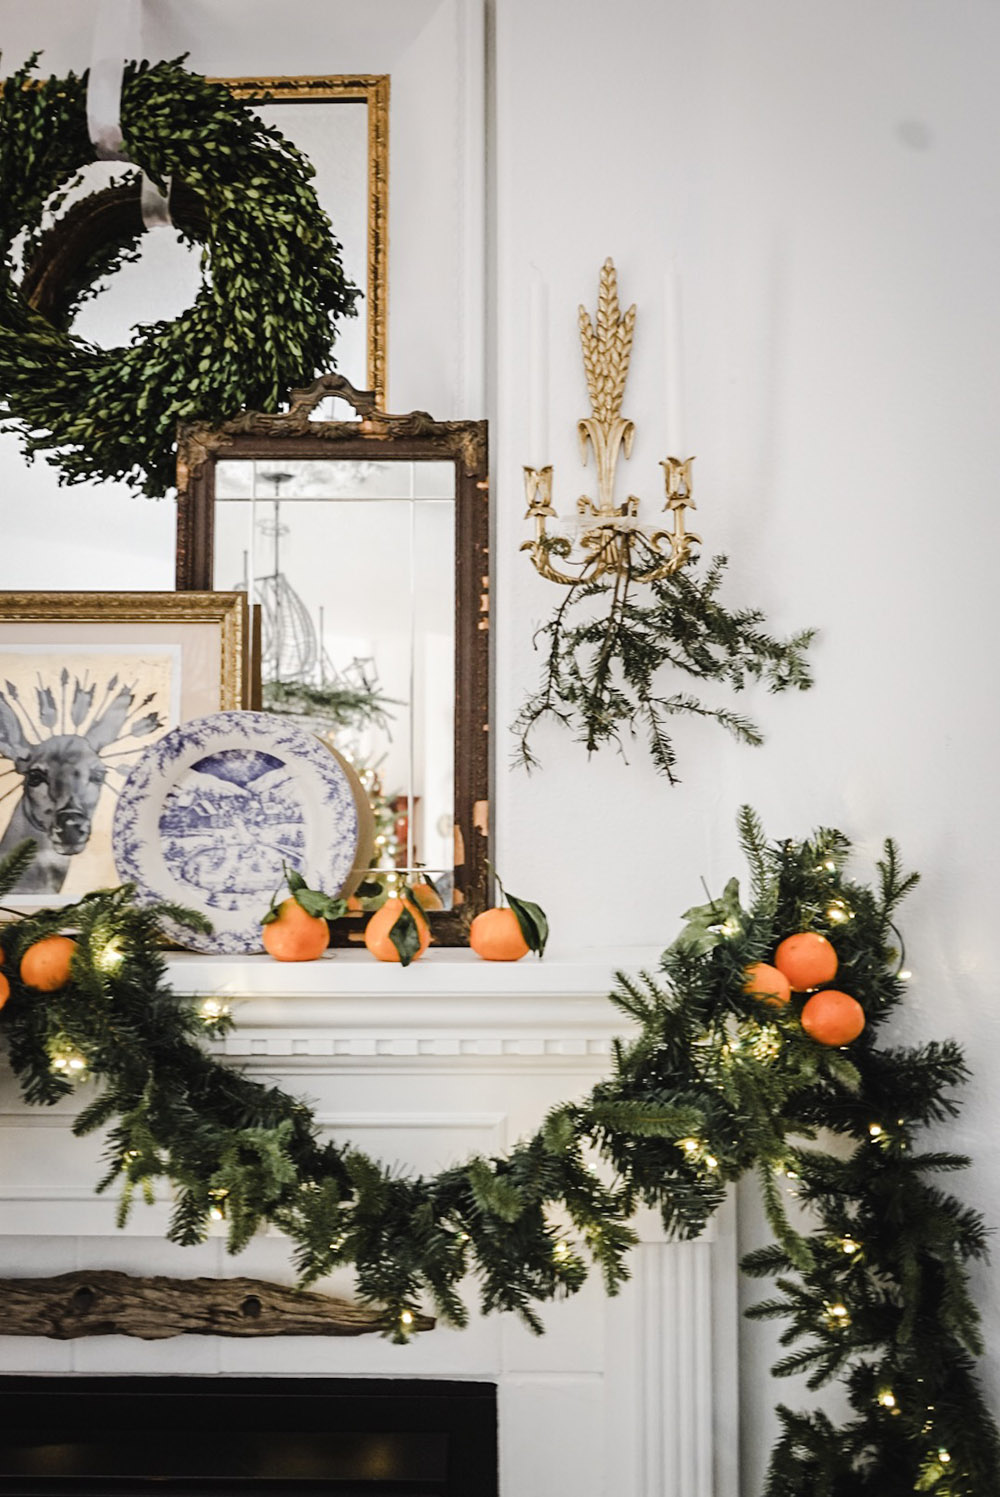 A wreath and garland with oranges decorate a fireplace.